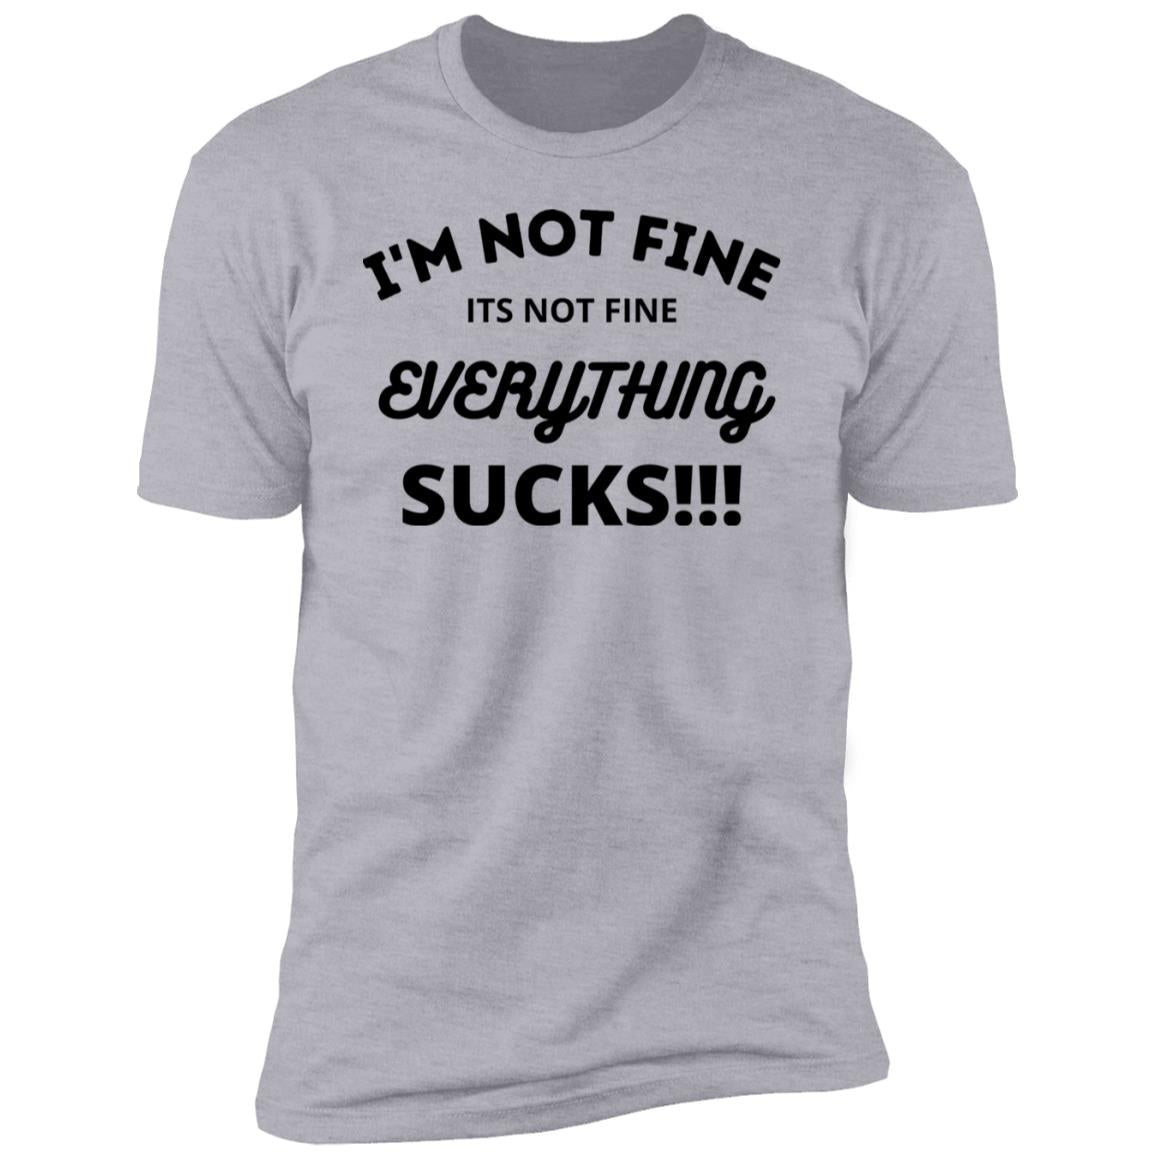 I'm Not Fine, It's Not Fine, Everything Sucks! T-shirt, Funny Sarcastic shirt